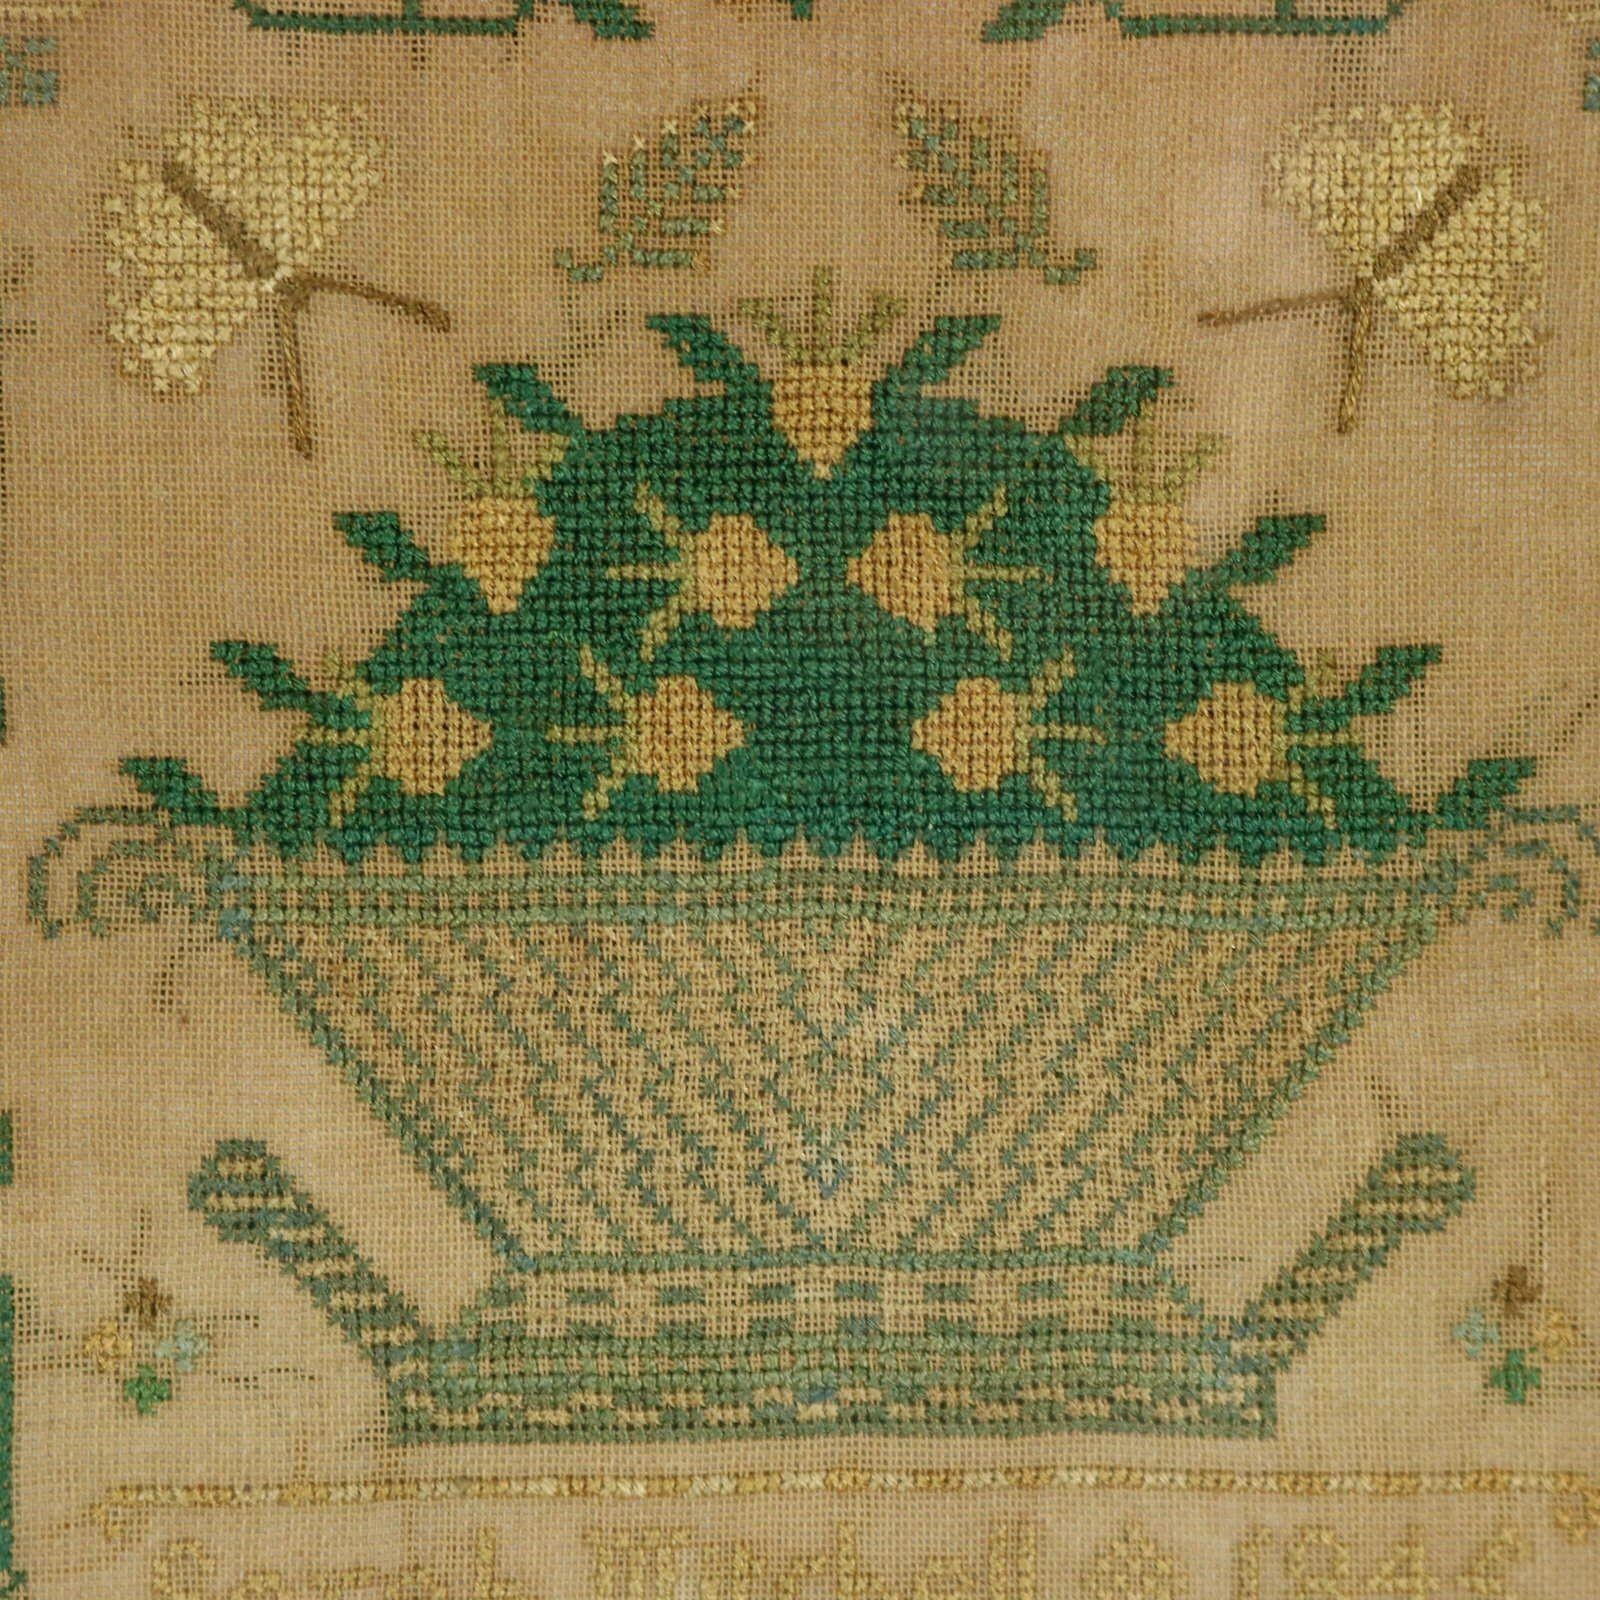 Victorian miniature sampler, 1846, by Sarah Mitchell. The sampler is worked in silk on a linen ground, in cross stitch throughout. Meandering strawberry border. Colours green, blue, gold and silver. Signed and dated 'Sarah Mitchell 1845'. A good set